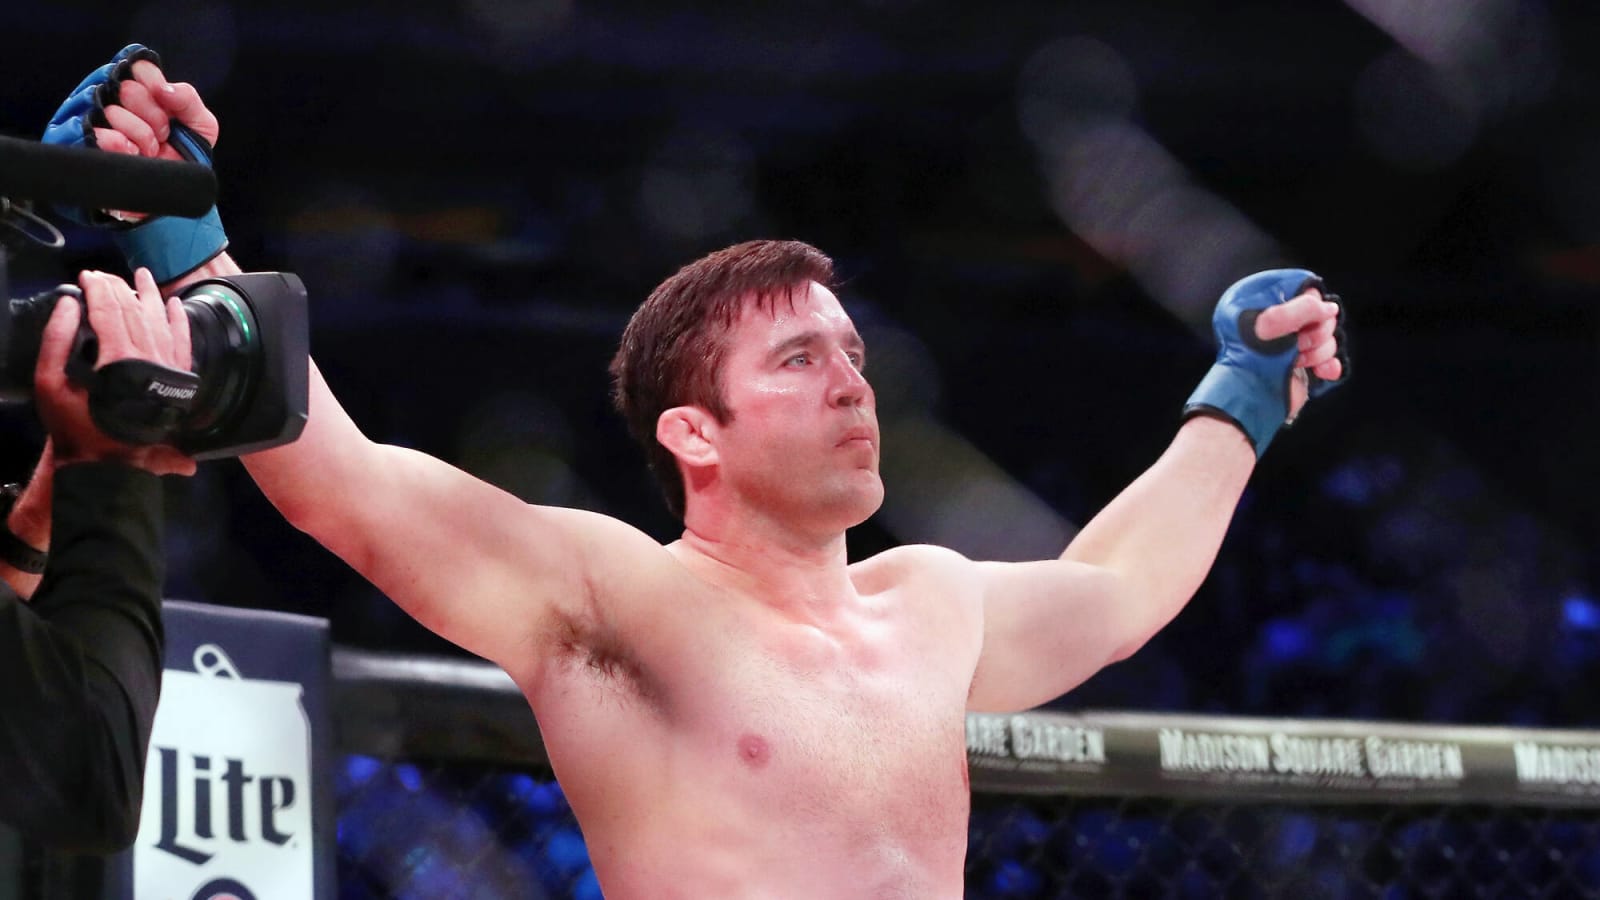 Anderson Silva – Chael Sonnen boxing match set for June 15th in Brazil